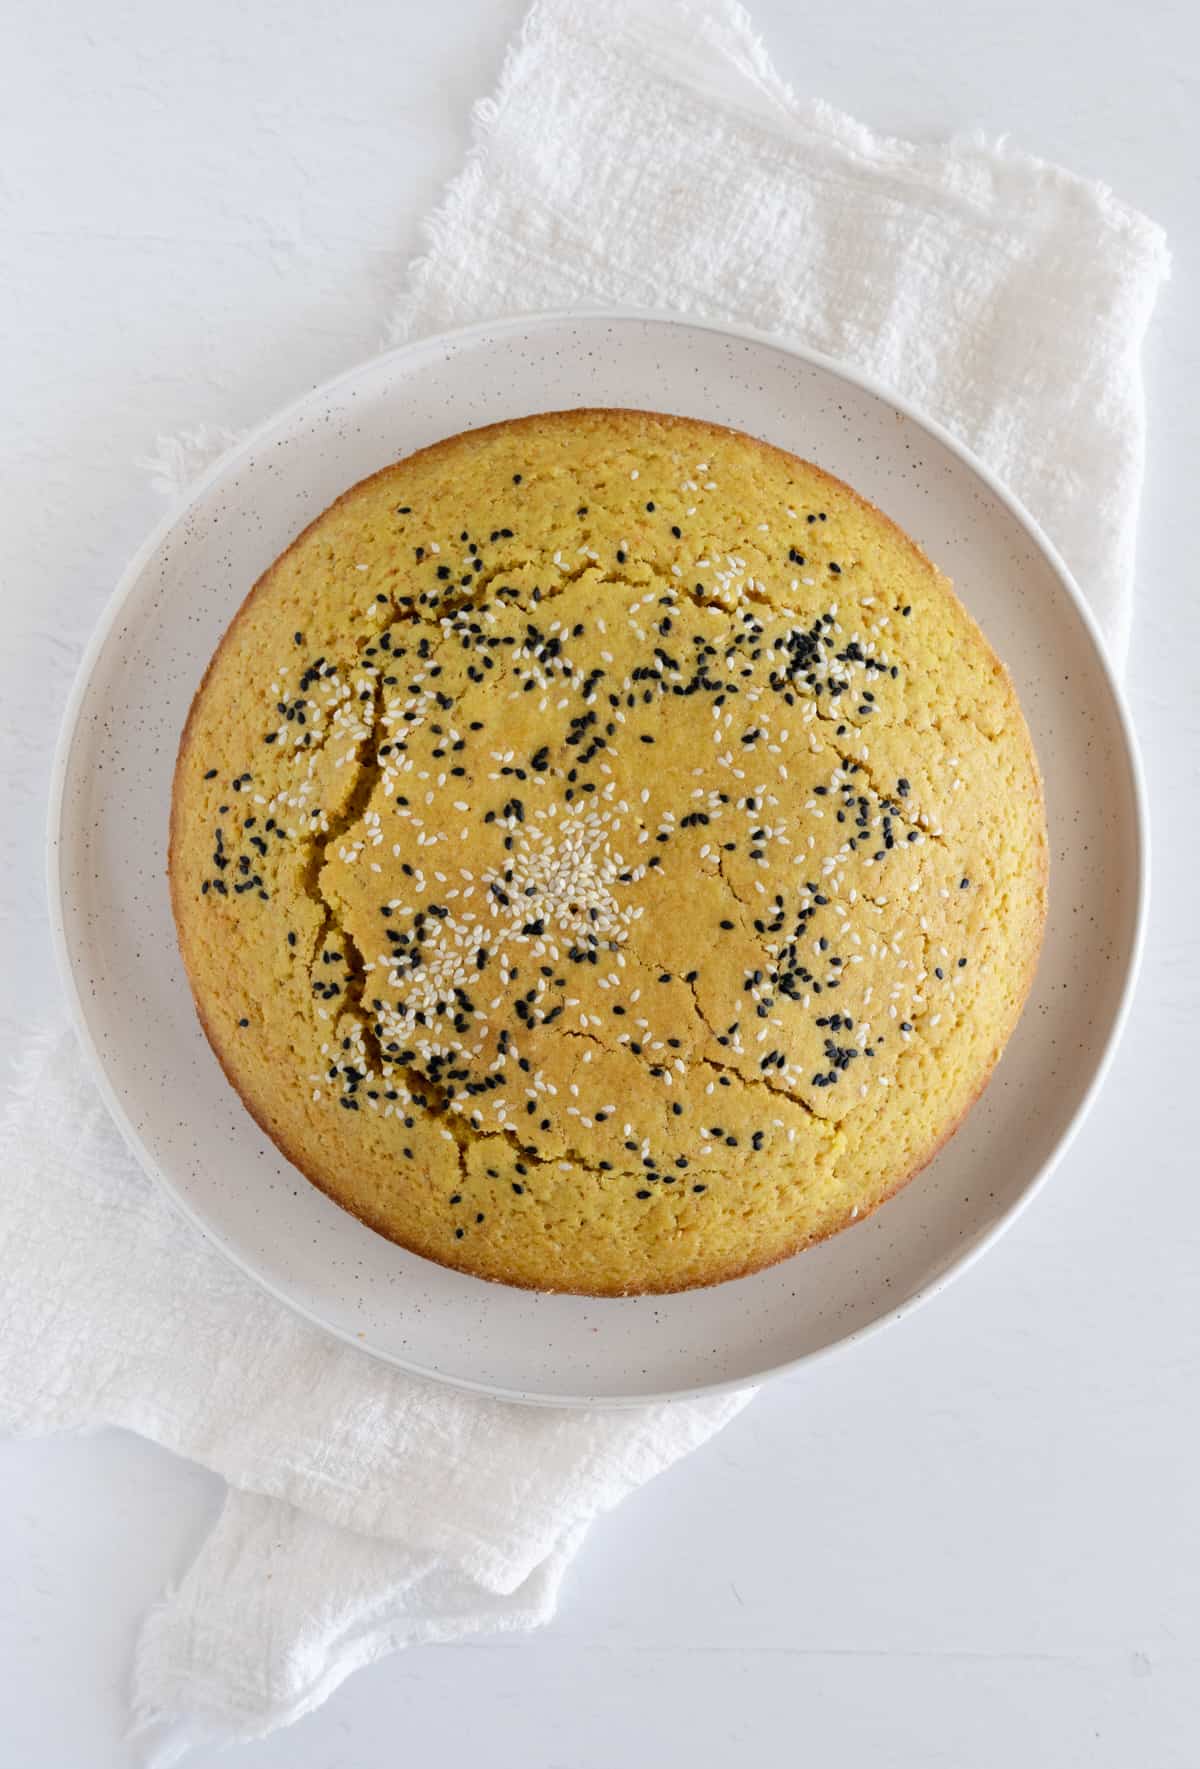 a round yellow cake in a white plate